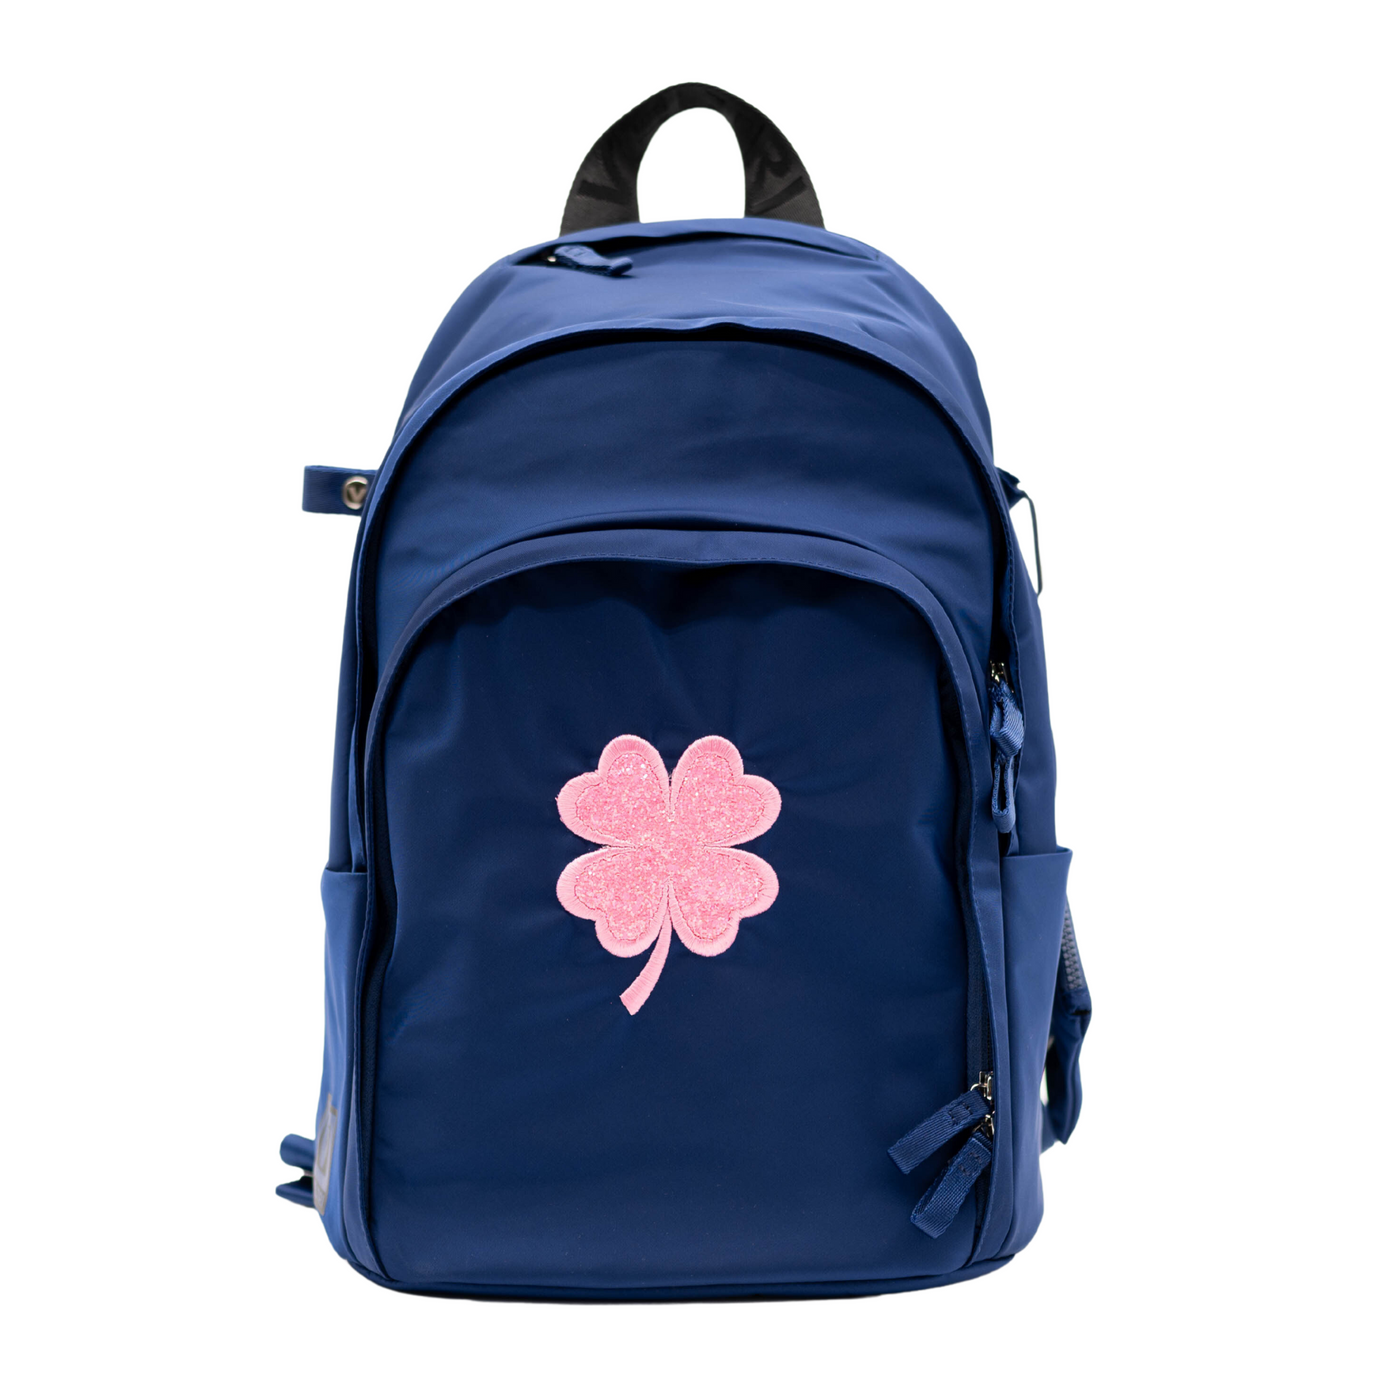 Novelty Delaire Backpack - “Lucky Clover” (custom embroidered - allow an additional 5 business days to ship)